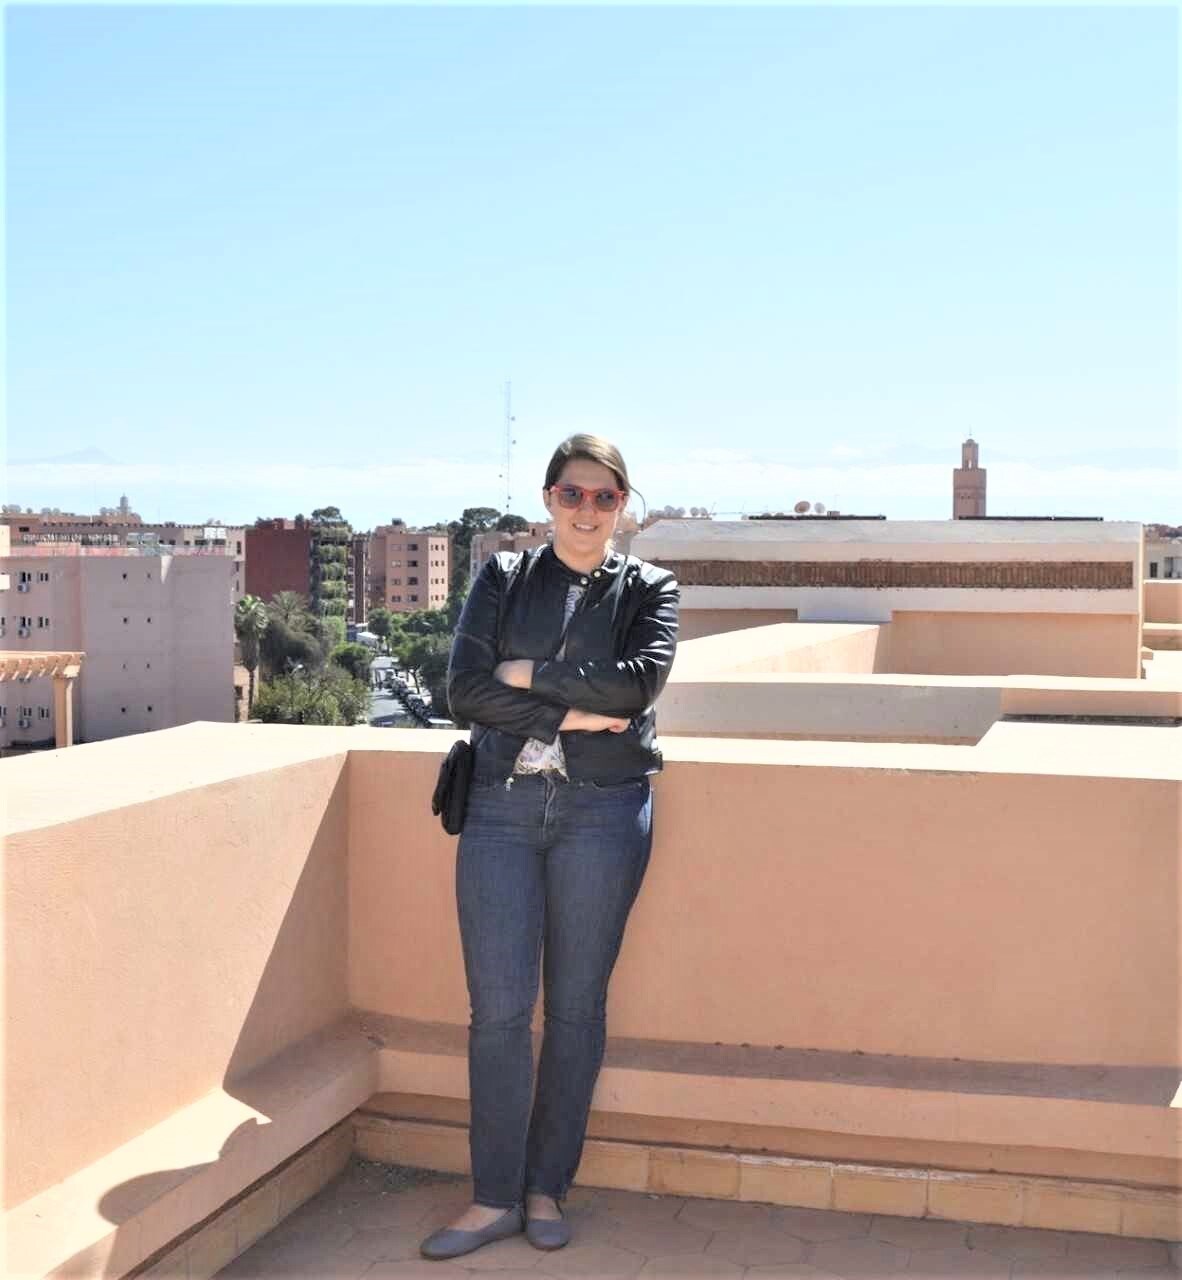 UMass Lowell History Department Alumna Kate DiTullio poses on a rooftop with the Marrakech skyline behind her.